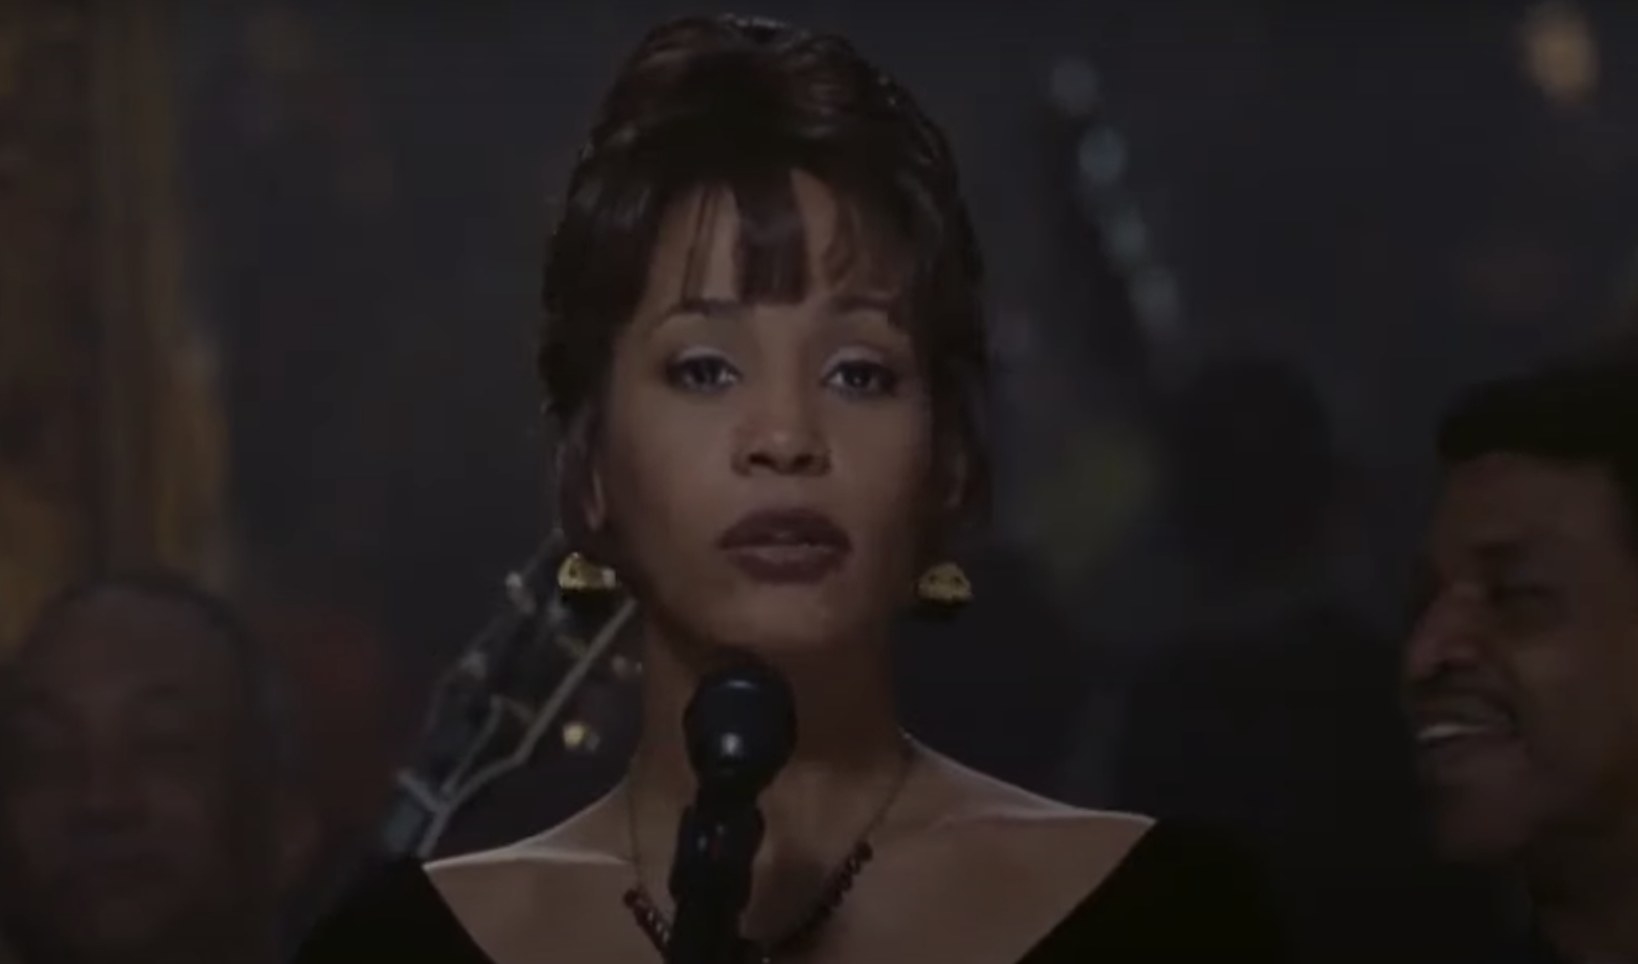 Whitney Houston stands on a stage with a microphone before her. She wears a black top and dangly earrings